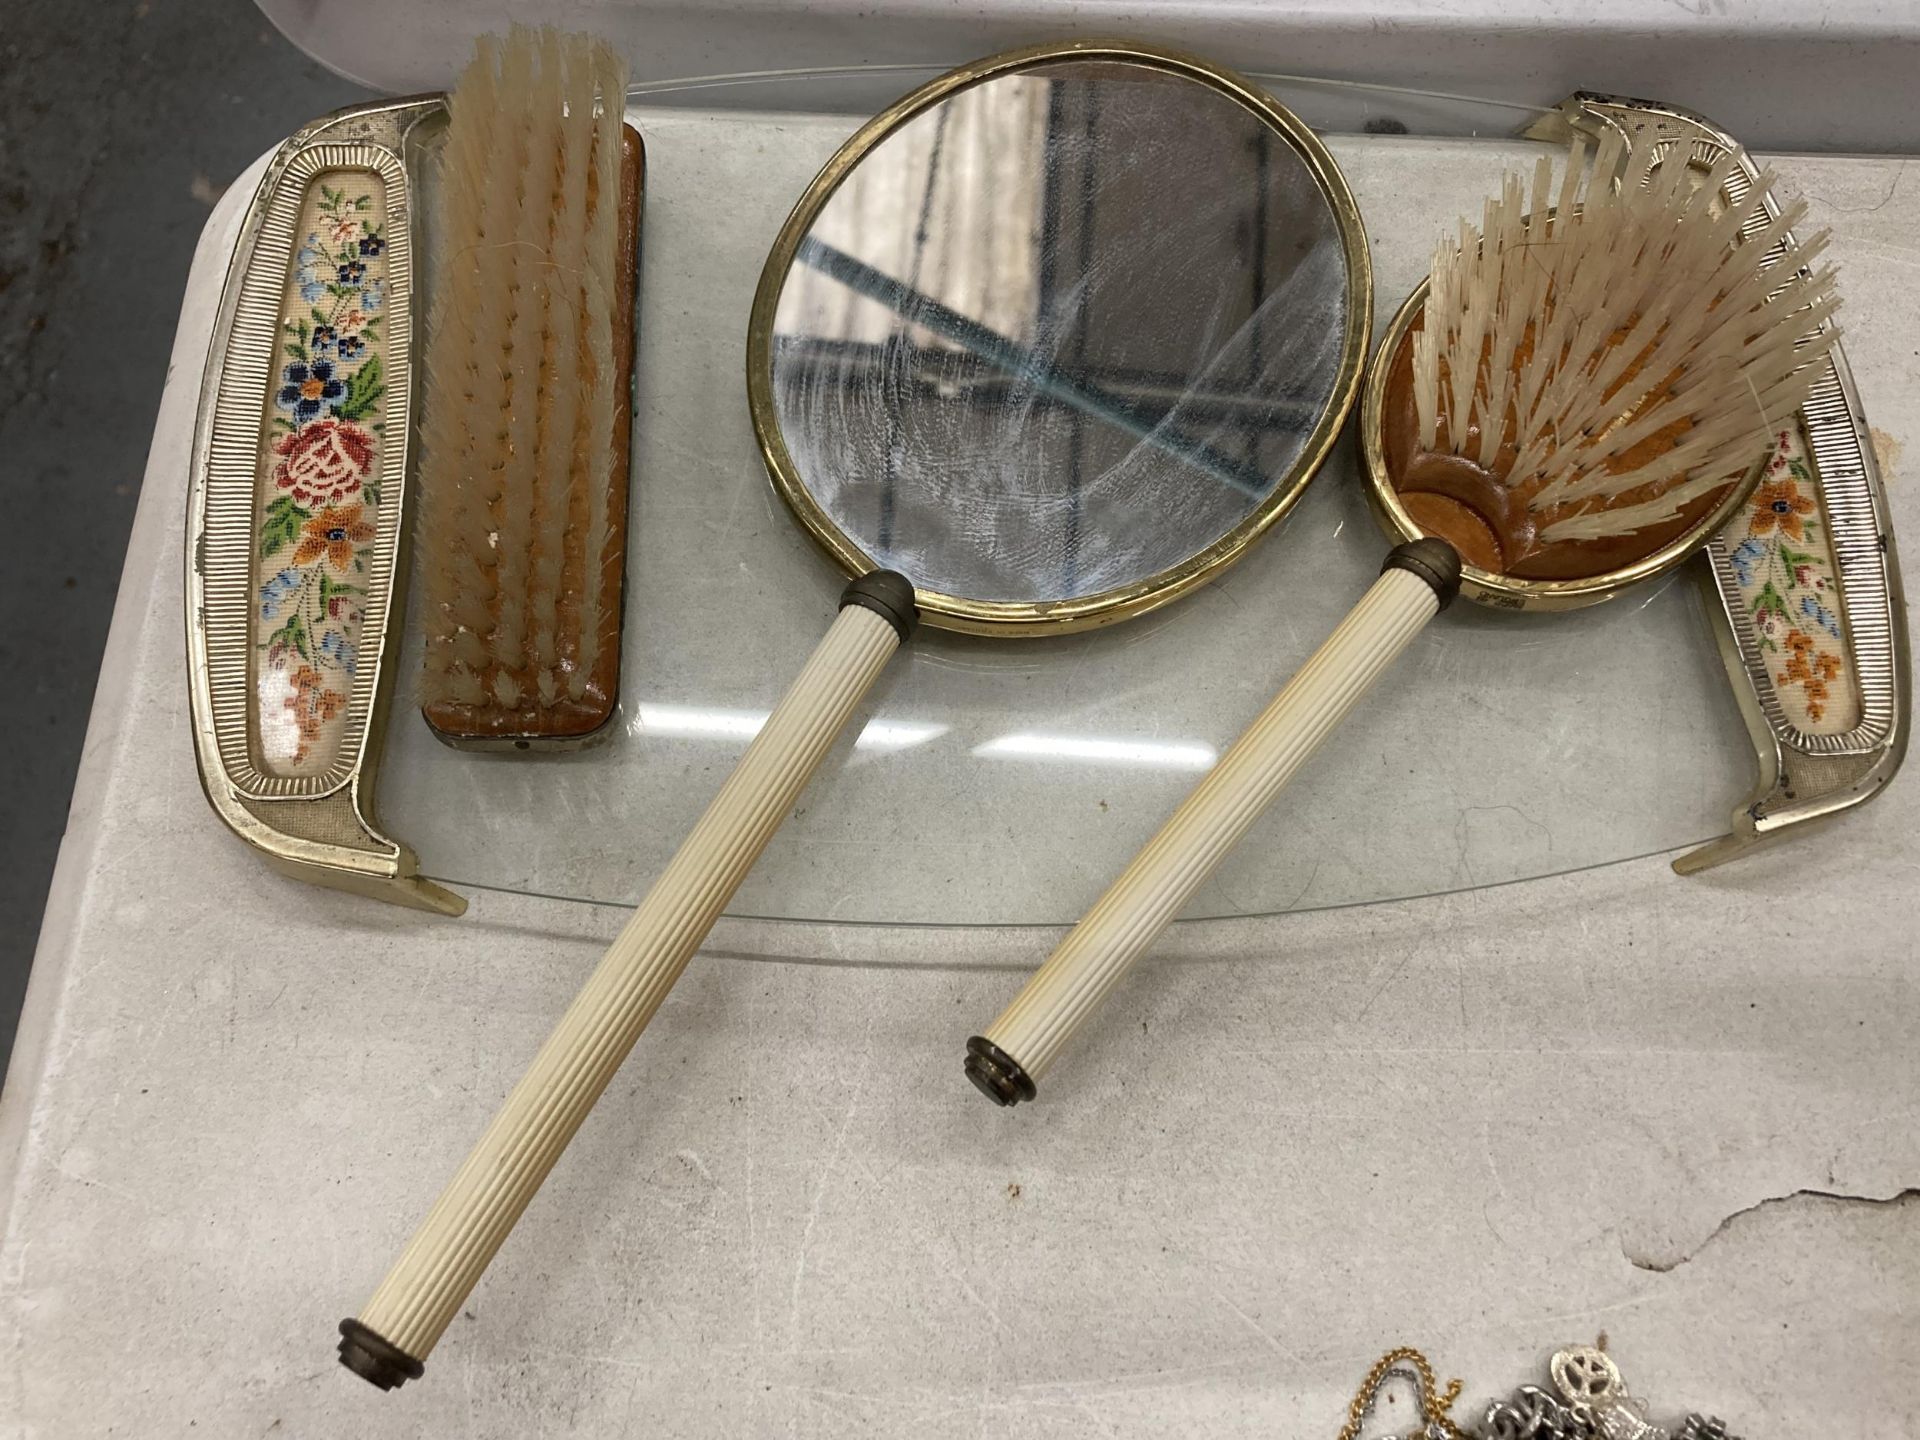 A VINTAGE PETIT-POINT BRUSH AND MIRROR SET ON A GLASS TRAY - Image 4 of 4